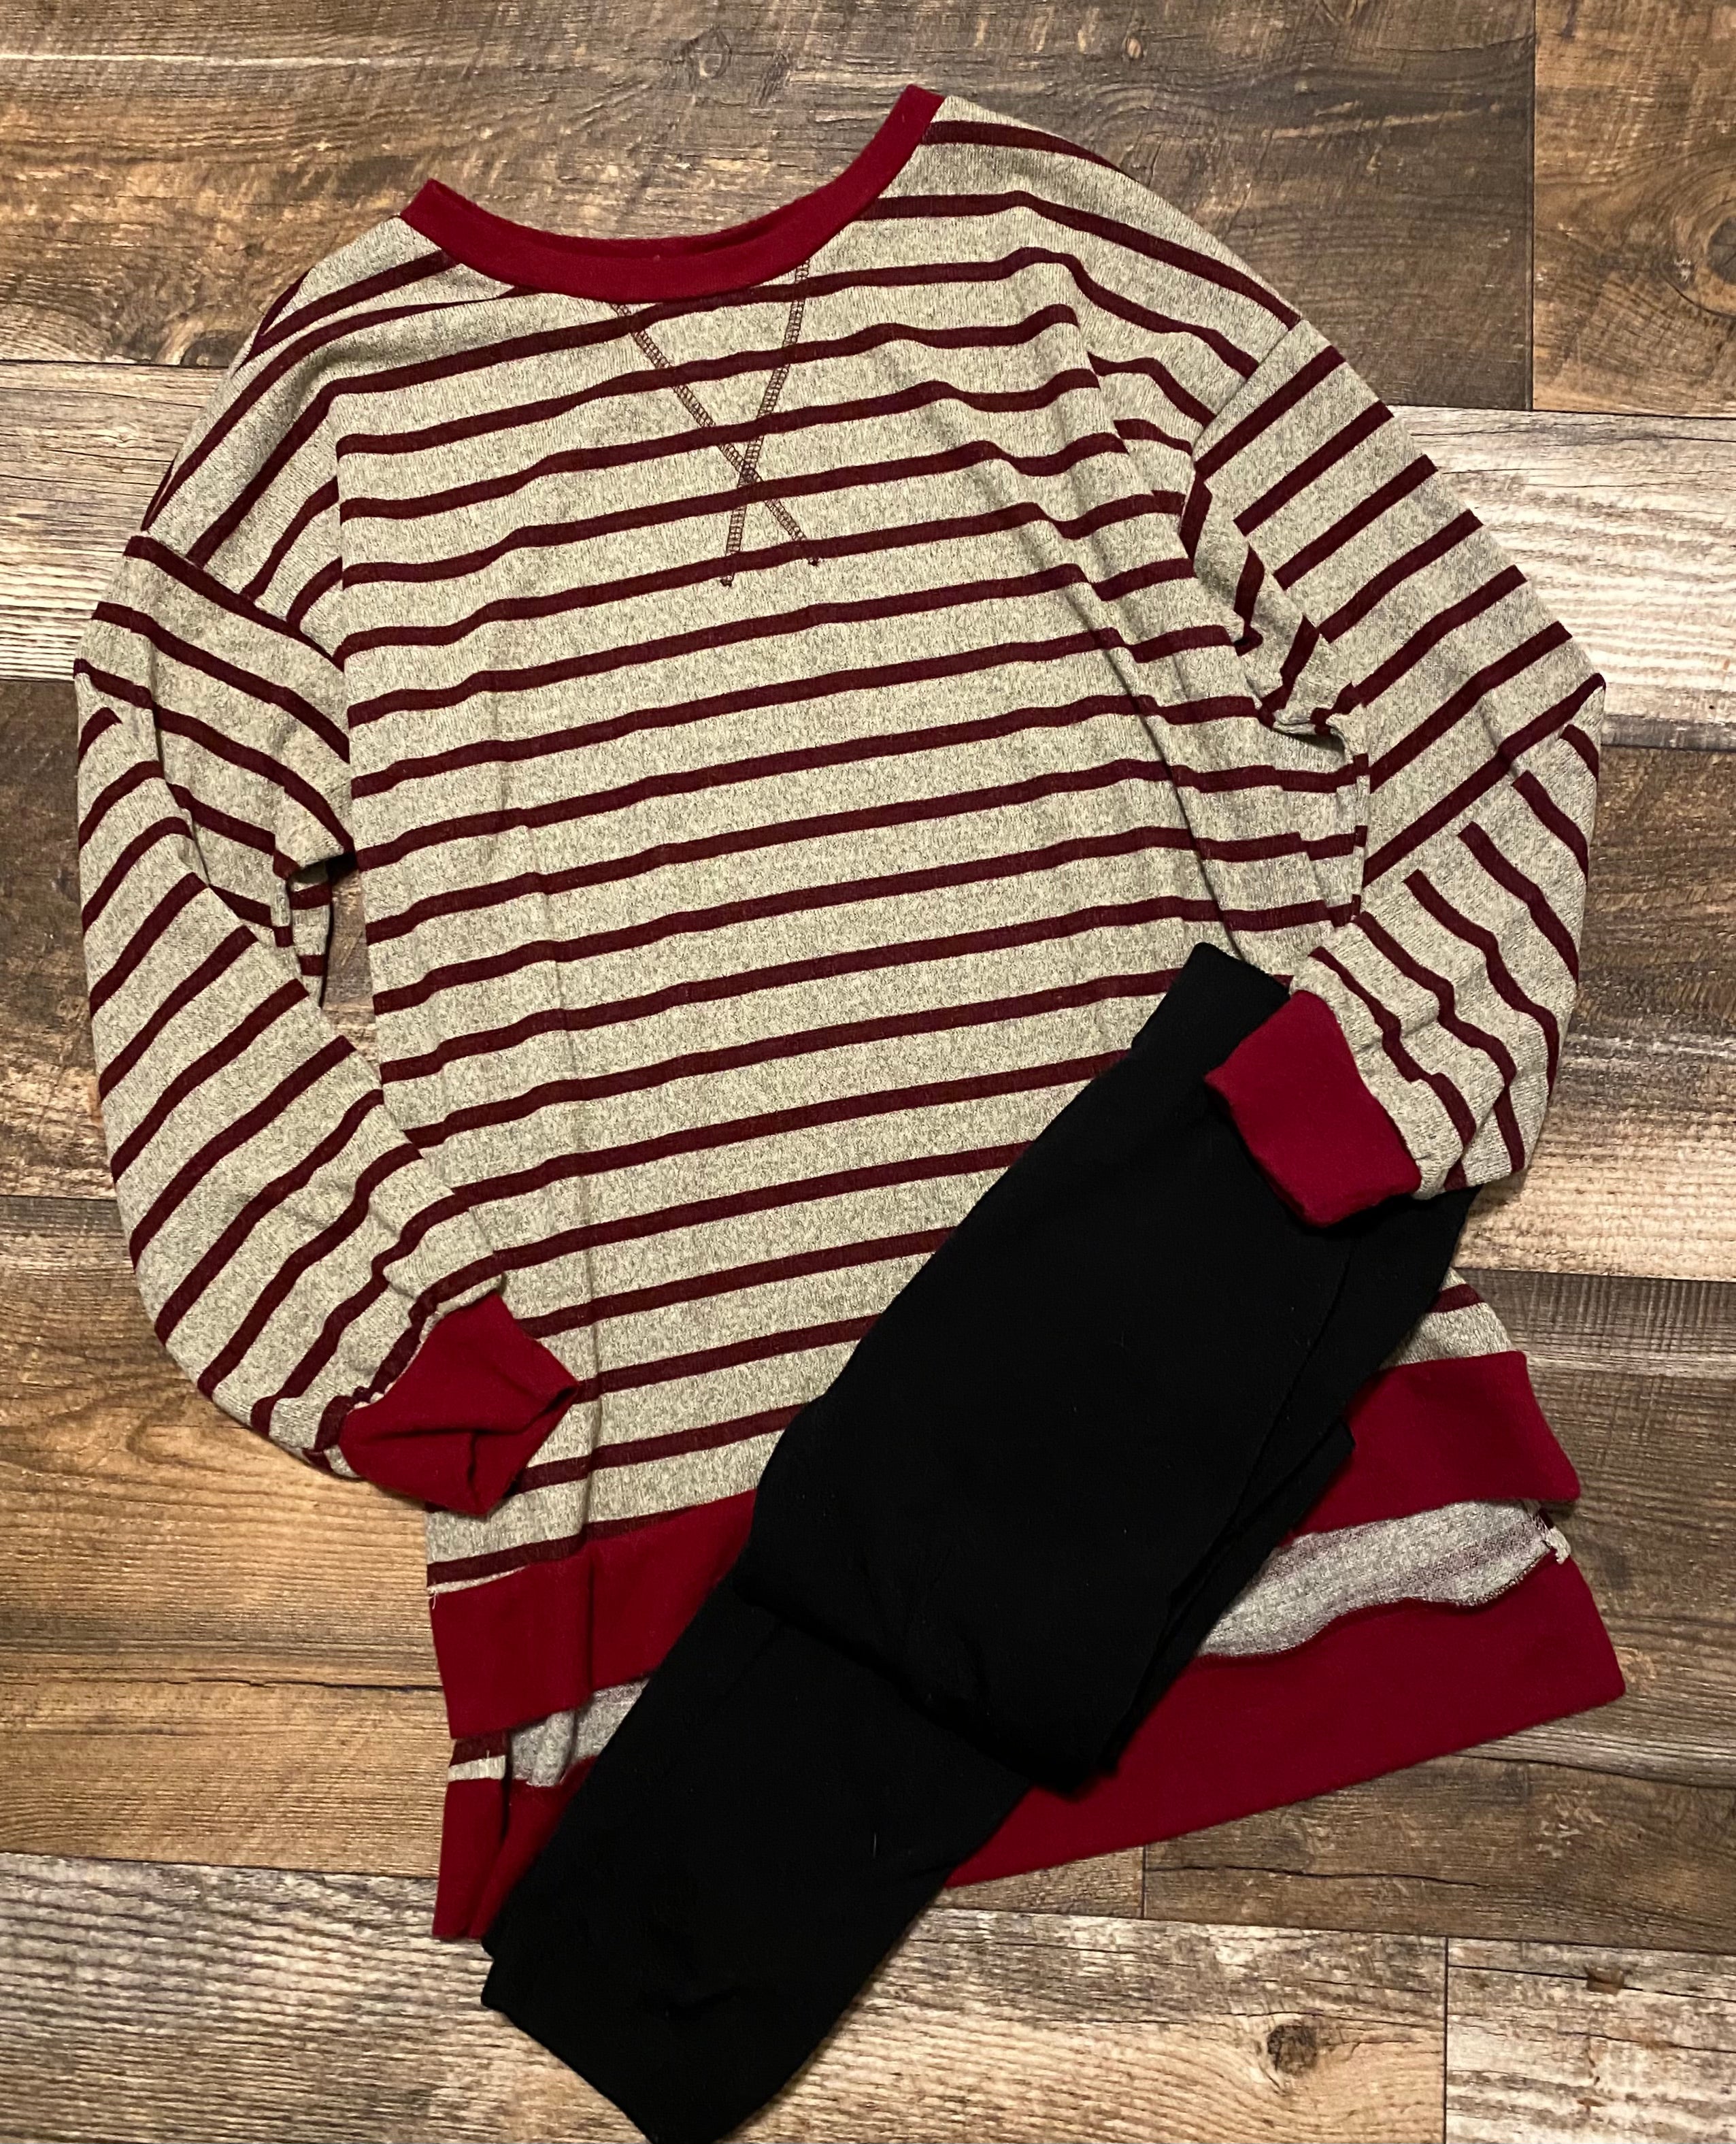 Top - Love me every day striped sweater